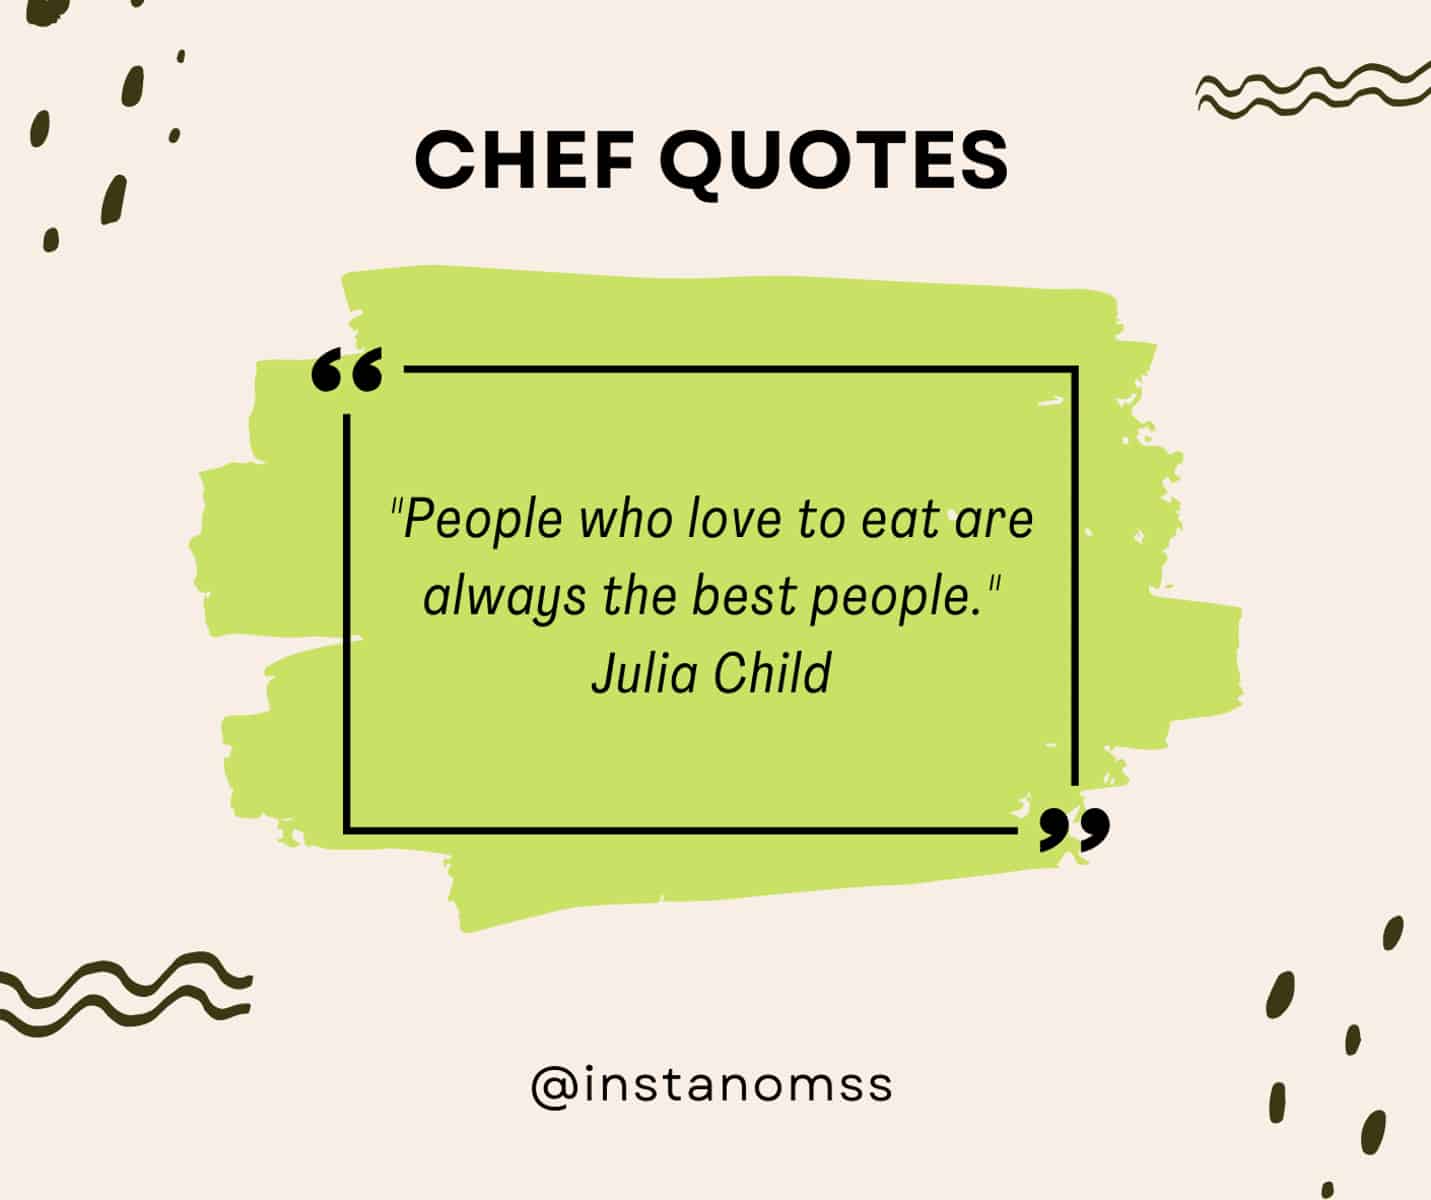 "People who love to eat are always the best people." Julia Child